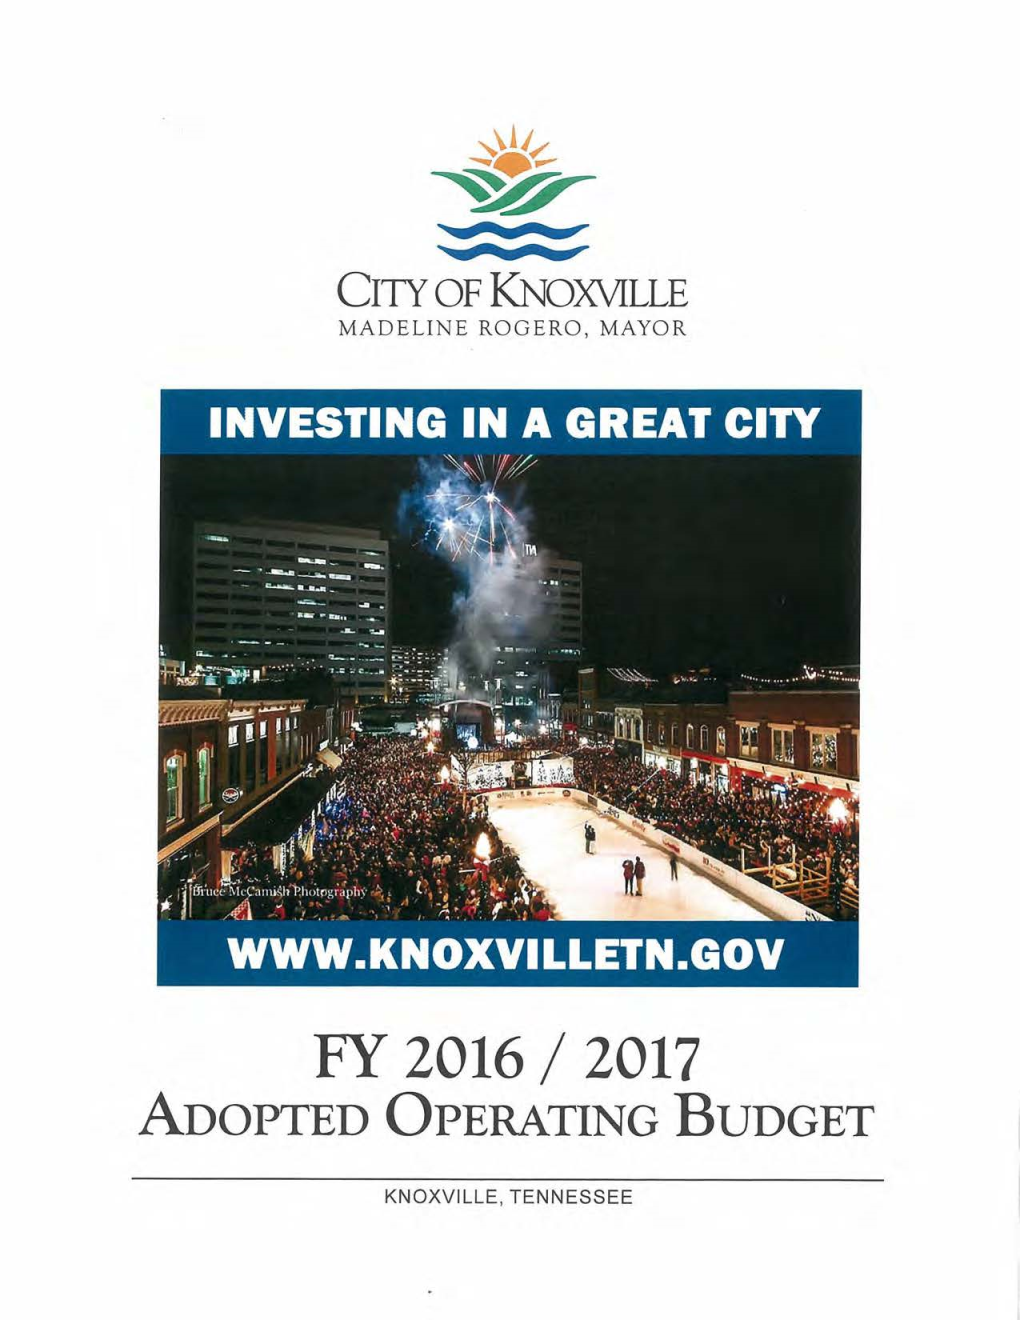 Fy 2016 I 2017 Adopted Operating Budget